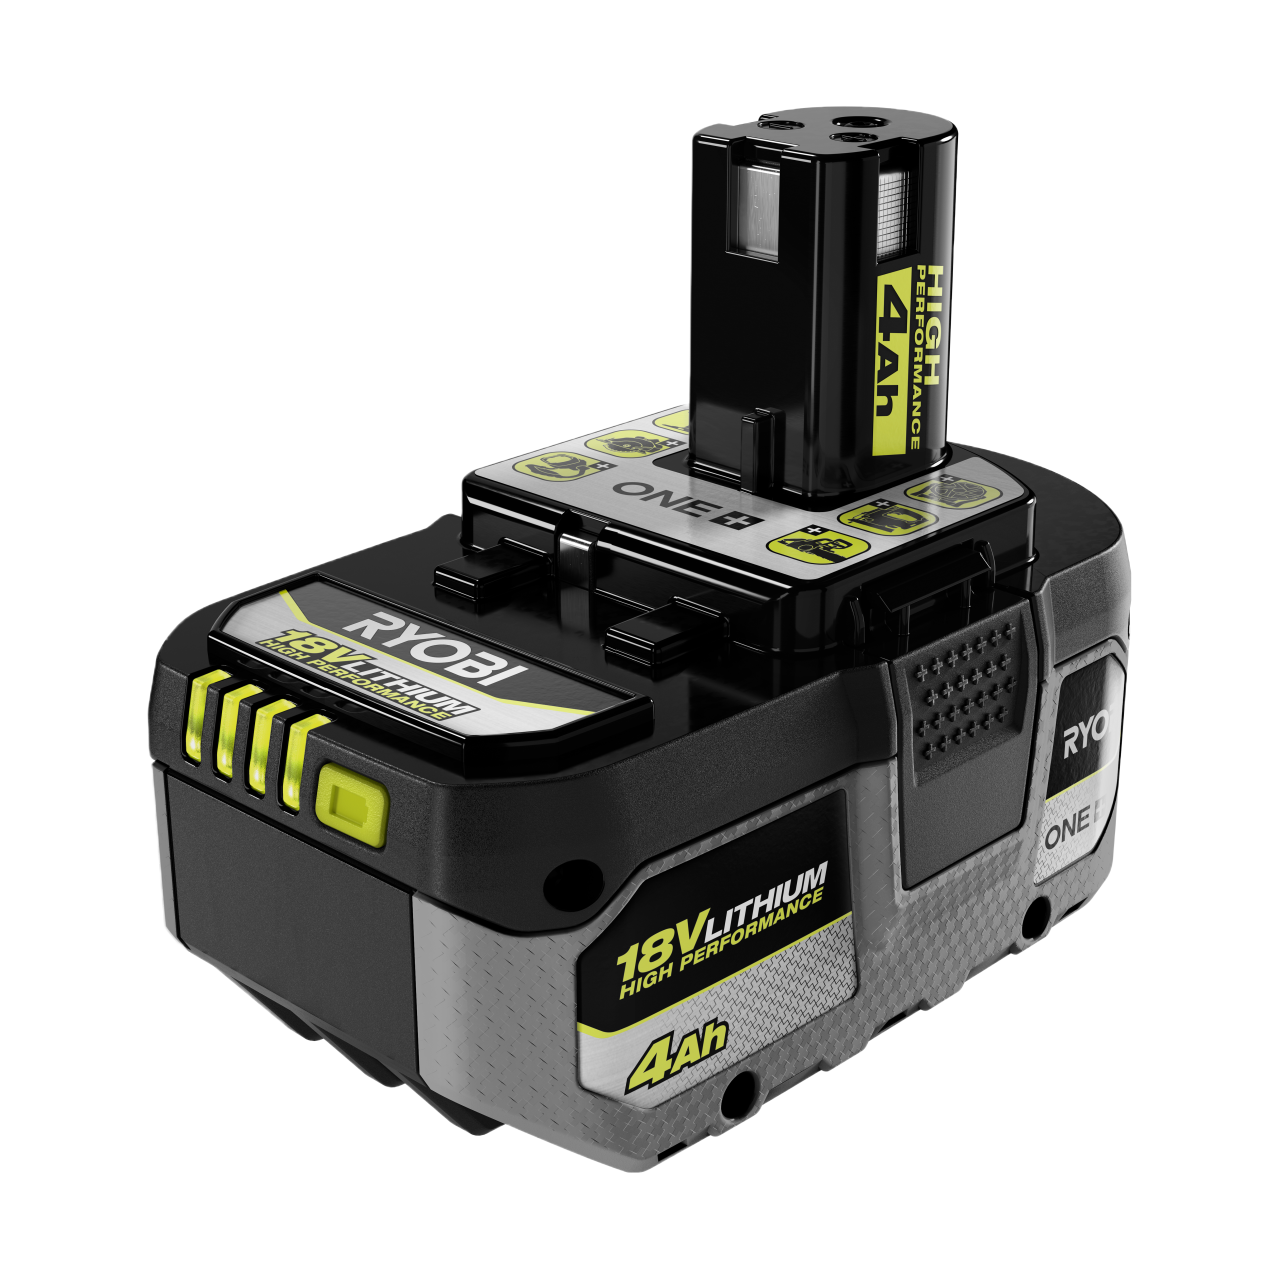 PowerToolsLineImage for Product category Batteries & Chargers.